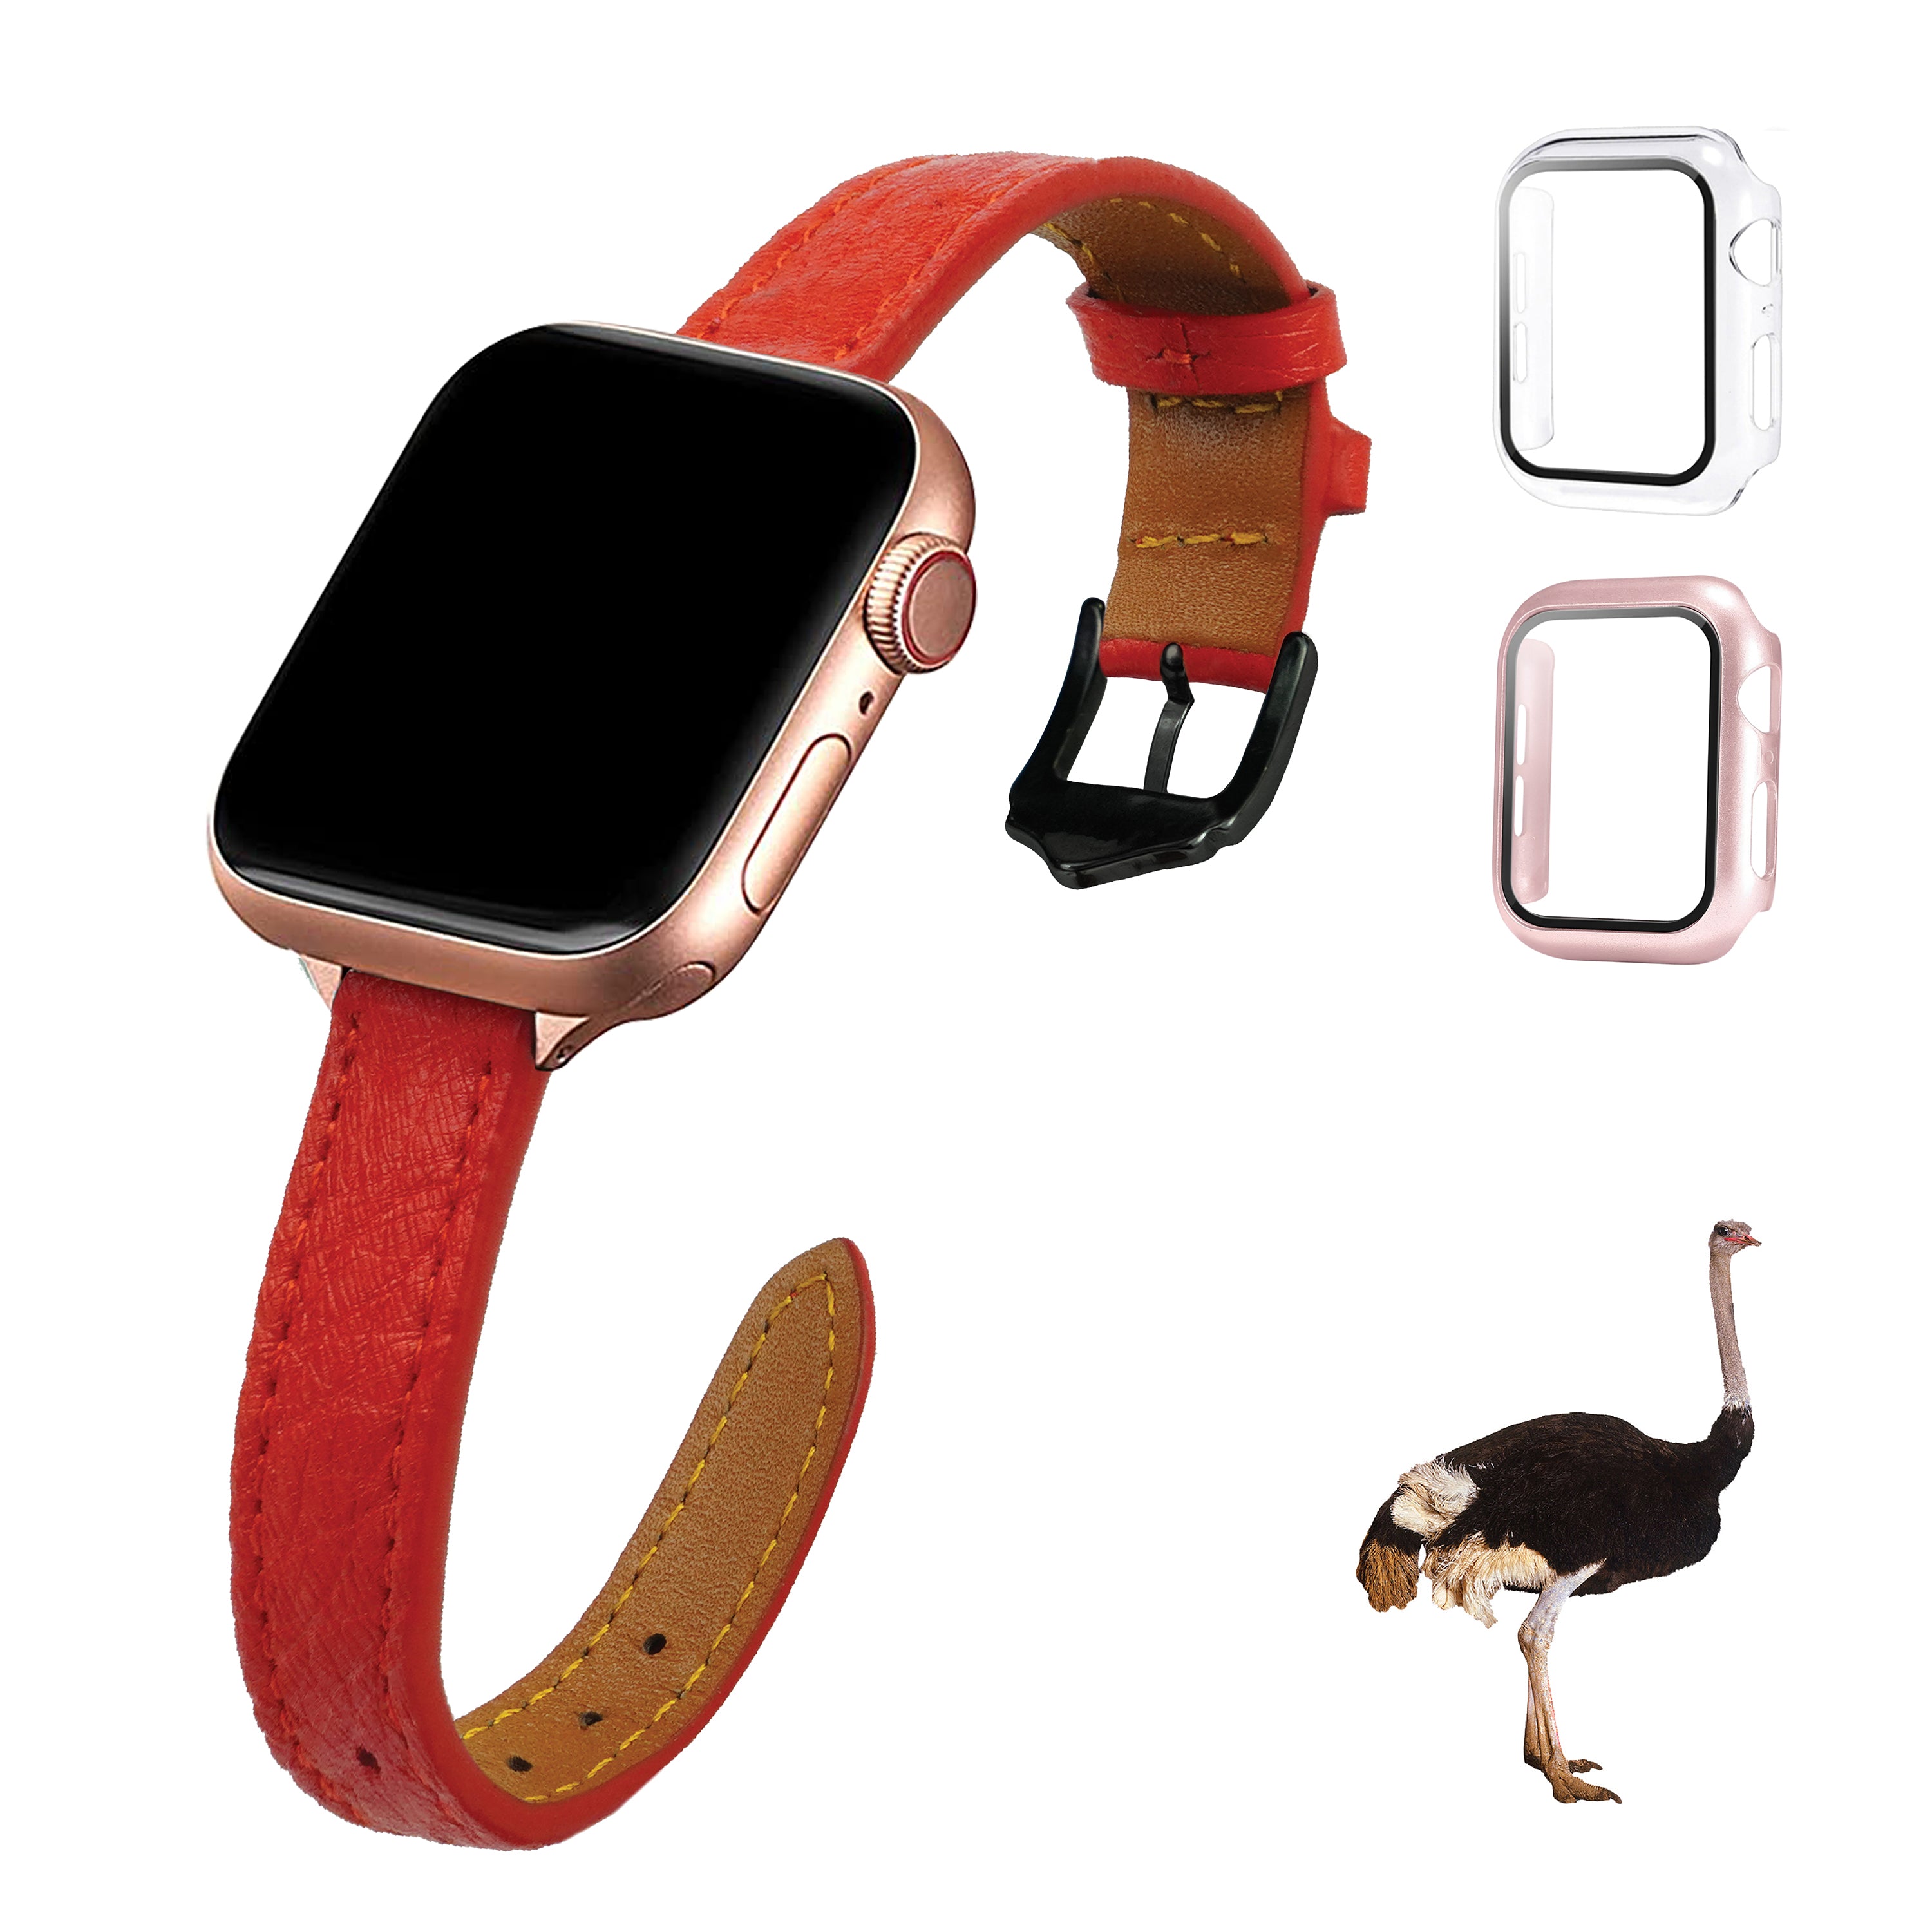 Red Flat Ostrich Leather Band Compatible Apple Watch Iwatch 44mm Screen Protector Case Black Adapter Replacement Strap For Smartwatch Series 4 5 6 SE Leather Handmade AW-190B-W-44MM